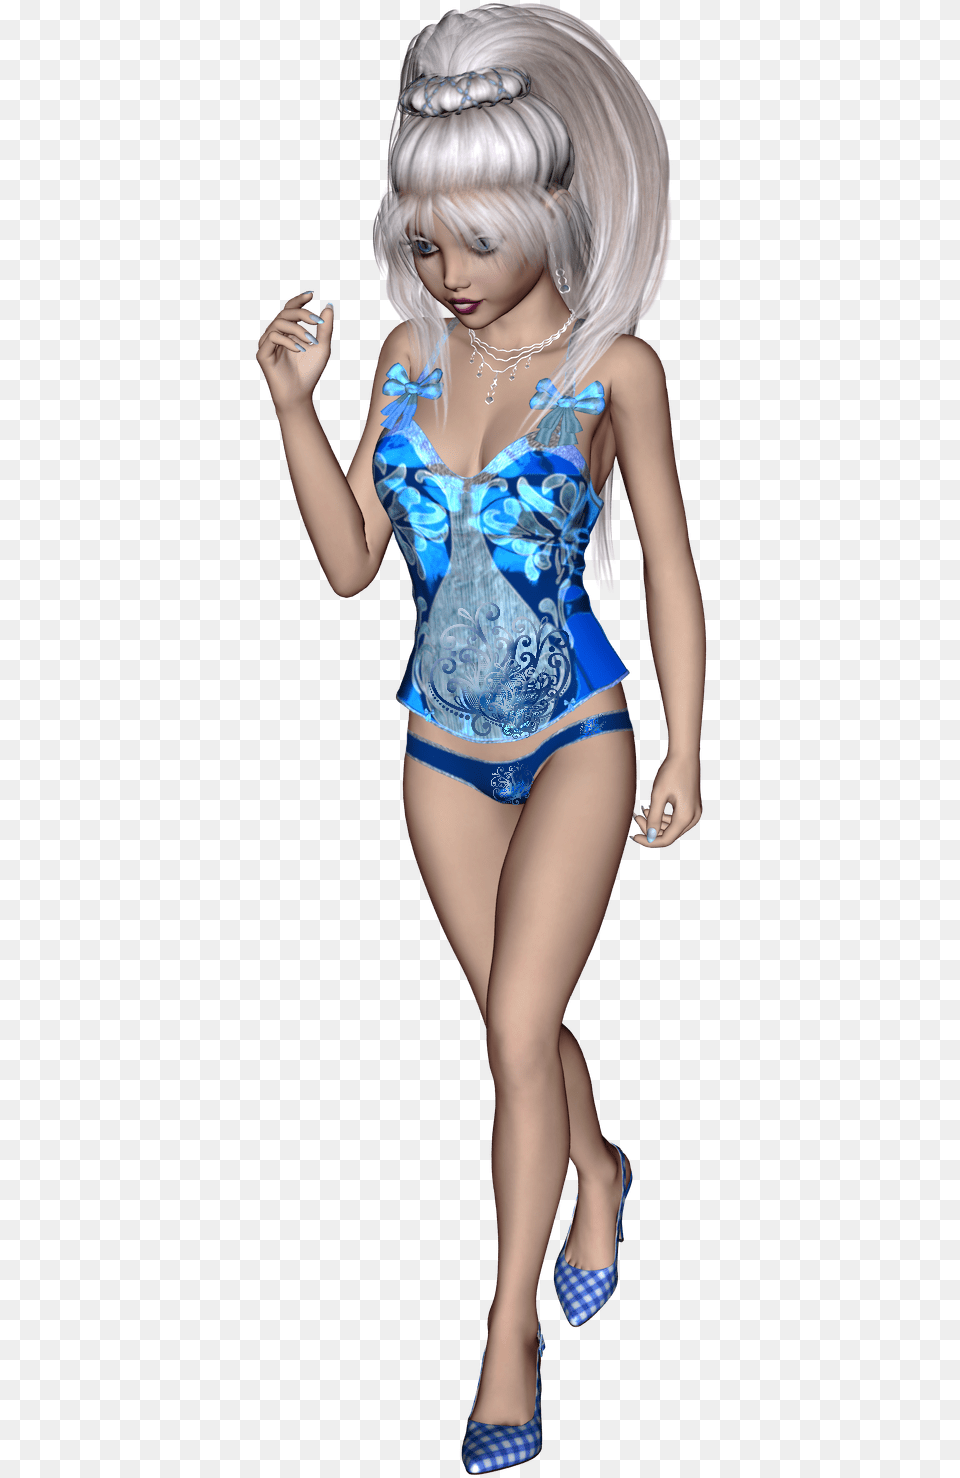 Lingerie Top, Body Part, Clothing, Dress, Person Png Image